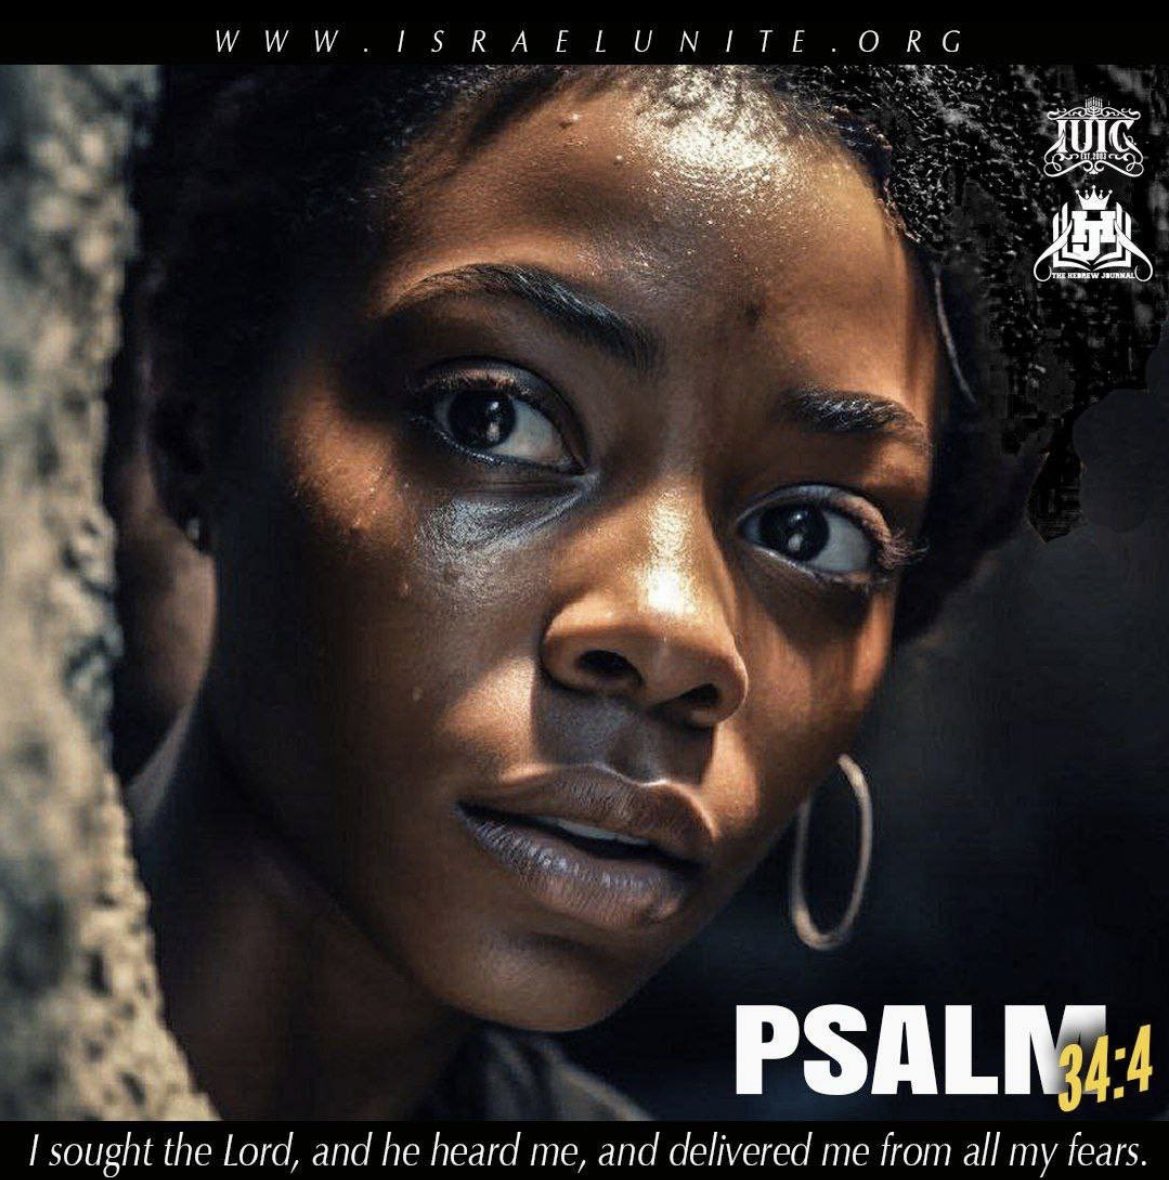 Visit our website here 💻👨🏾‍💻🖥
🔴 solo.to/hebrewjournal
.……………………………………
Whether in tears 😢 or overwhelmed with fears 😨, the righteous will draw near 🙌🏾📖 trusting that the Lord will hear.👂🏿 
#HebrewsJournal #IUICTV #IUIC  #News #Exclusive #GrabYourCopy #Bible